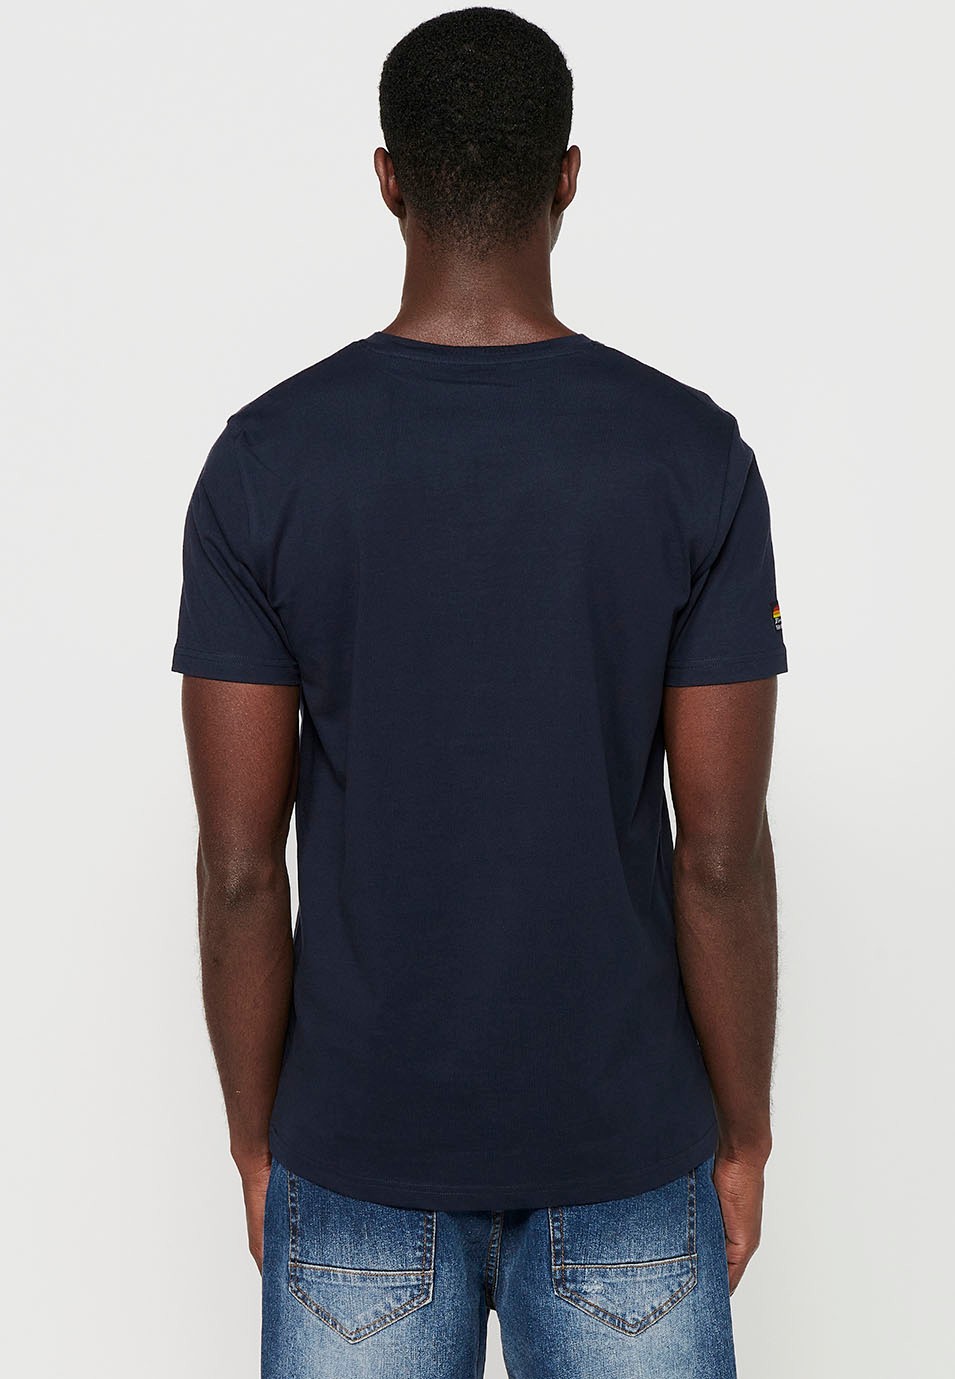 Short-sleeved cotton T-shirt with bicycle front print, navy color for men 7